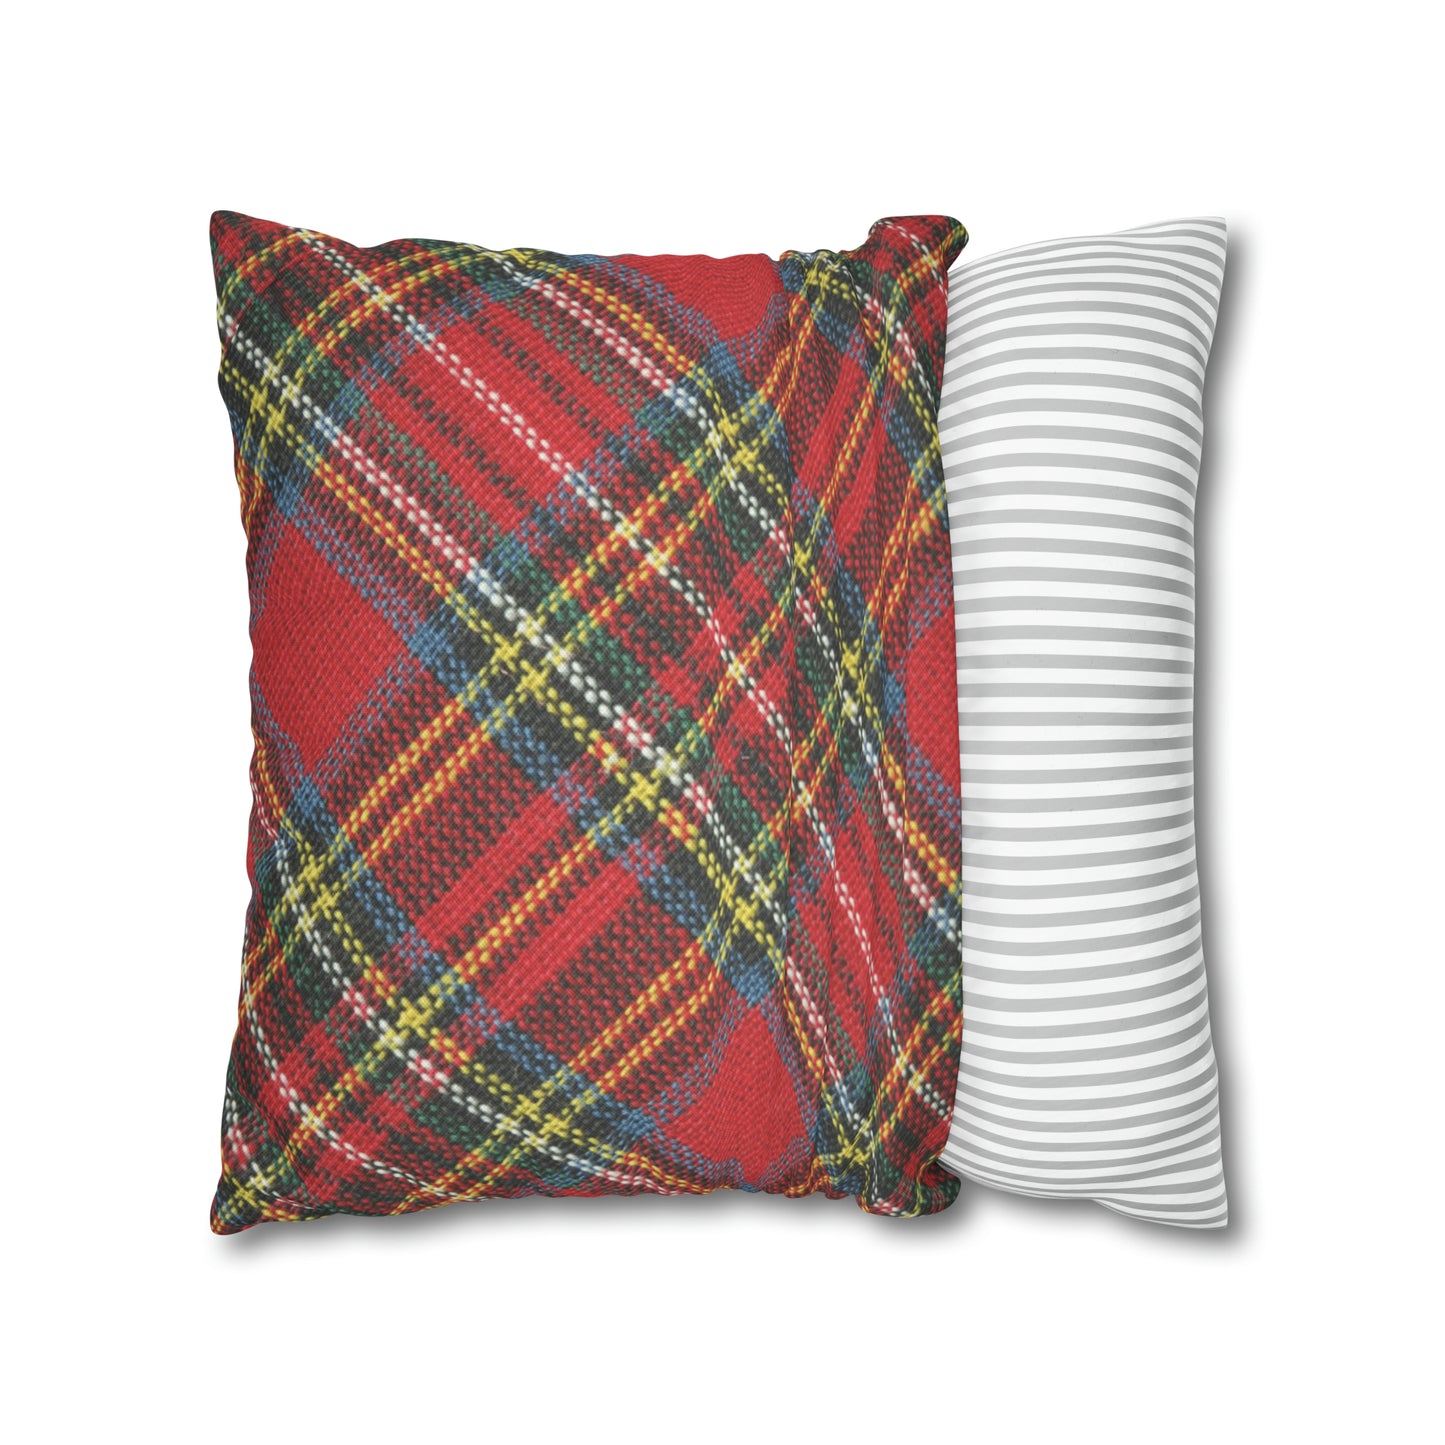 An American made Printify red and white plaid throw pillow case that is easy-care. Available in 3 sizes, this square pillow case is made of polyester.